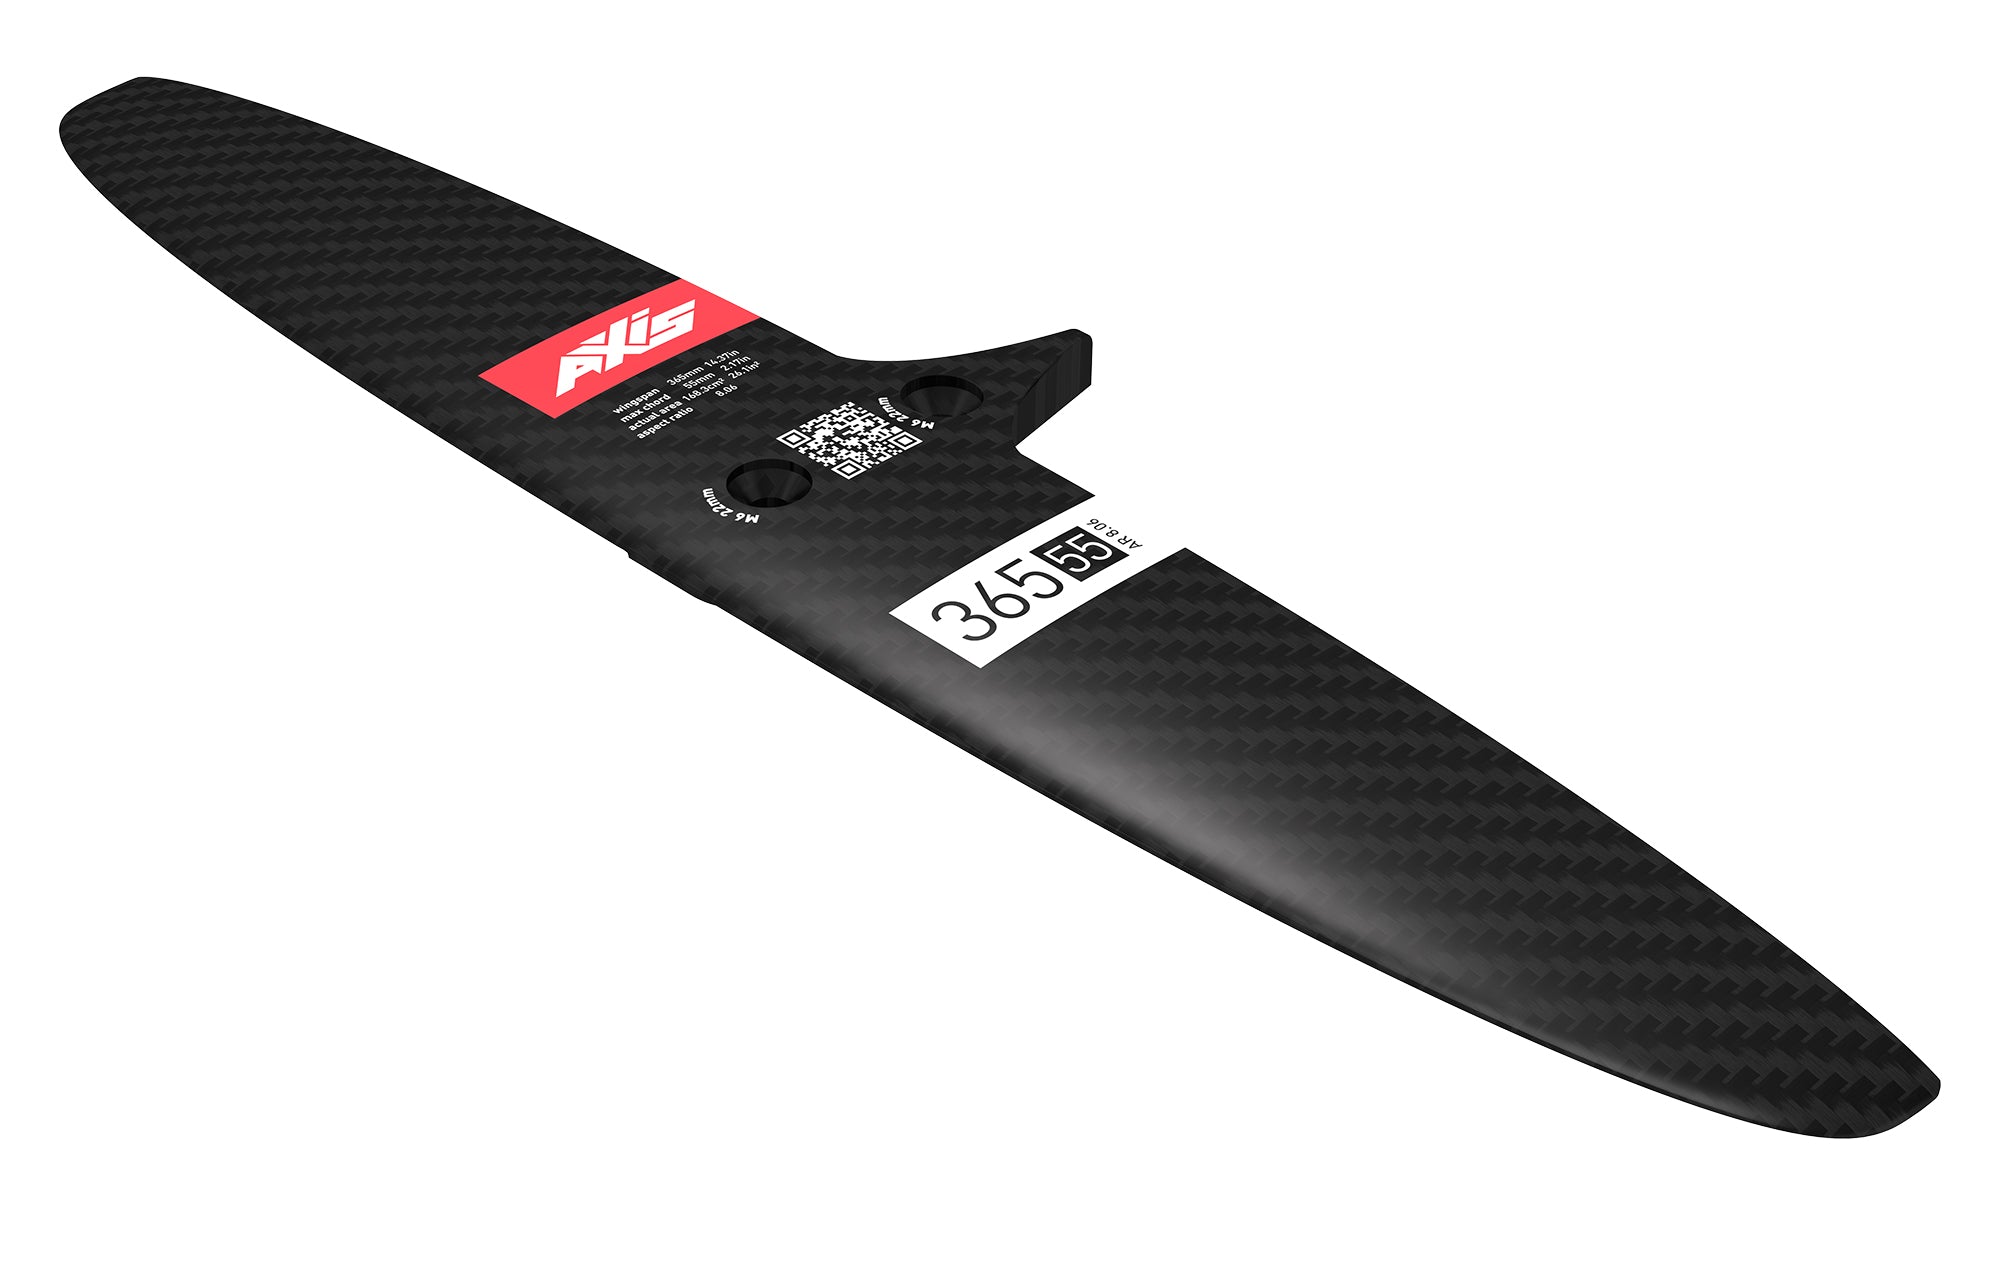 SKINNY - 365/55 Carbon Rear Hydrofoil wing